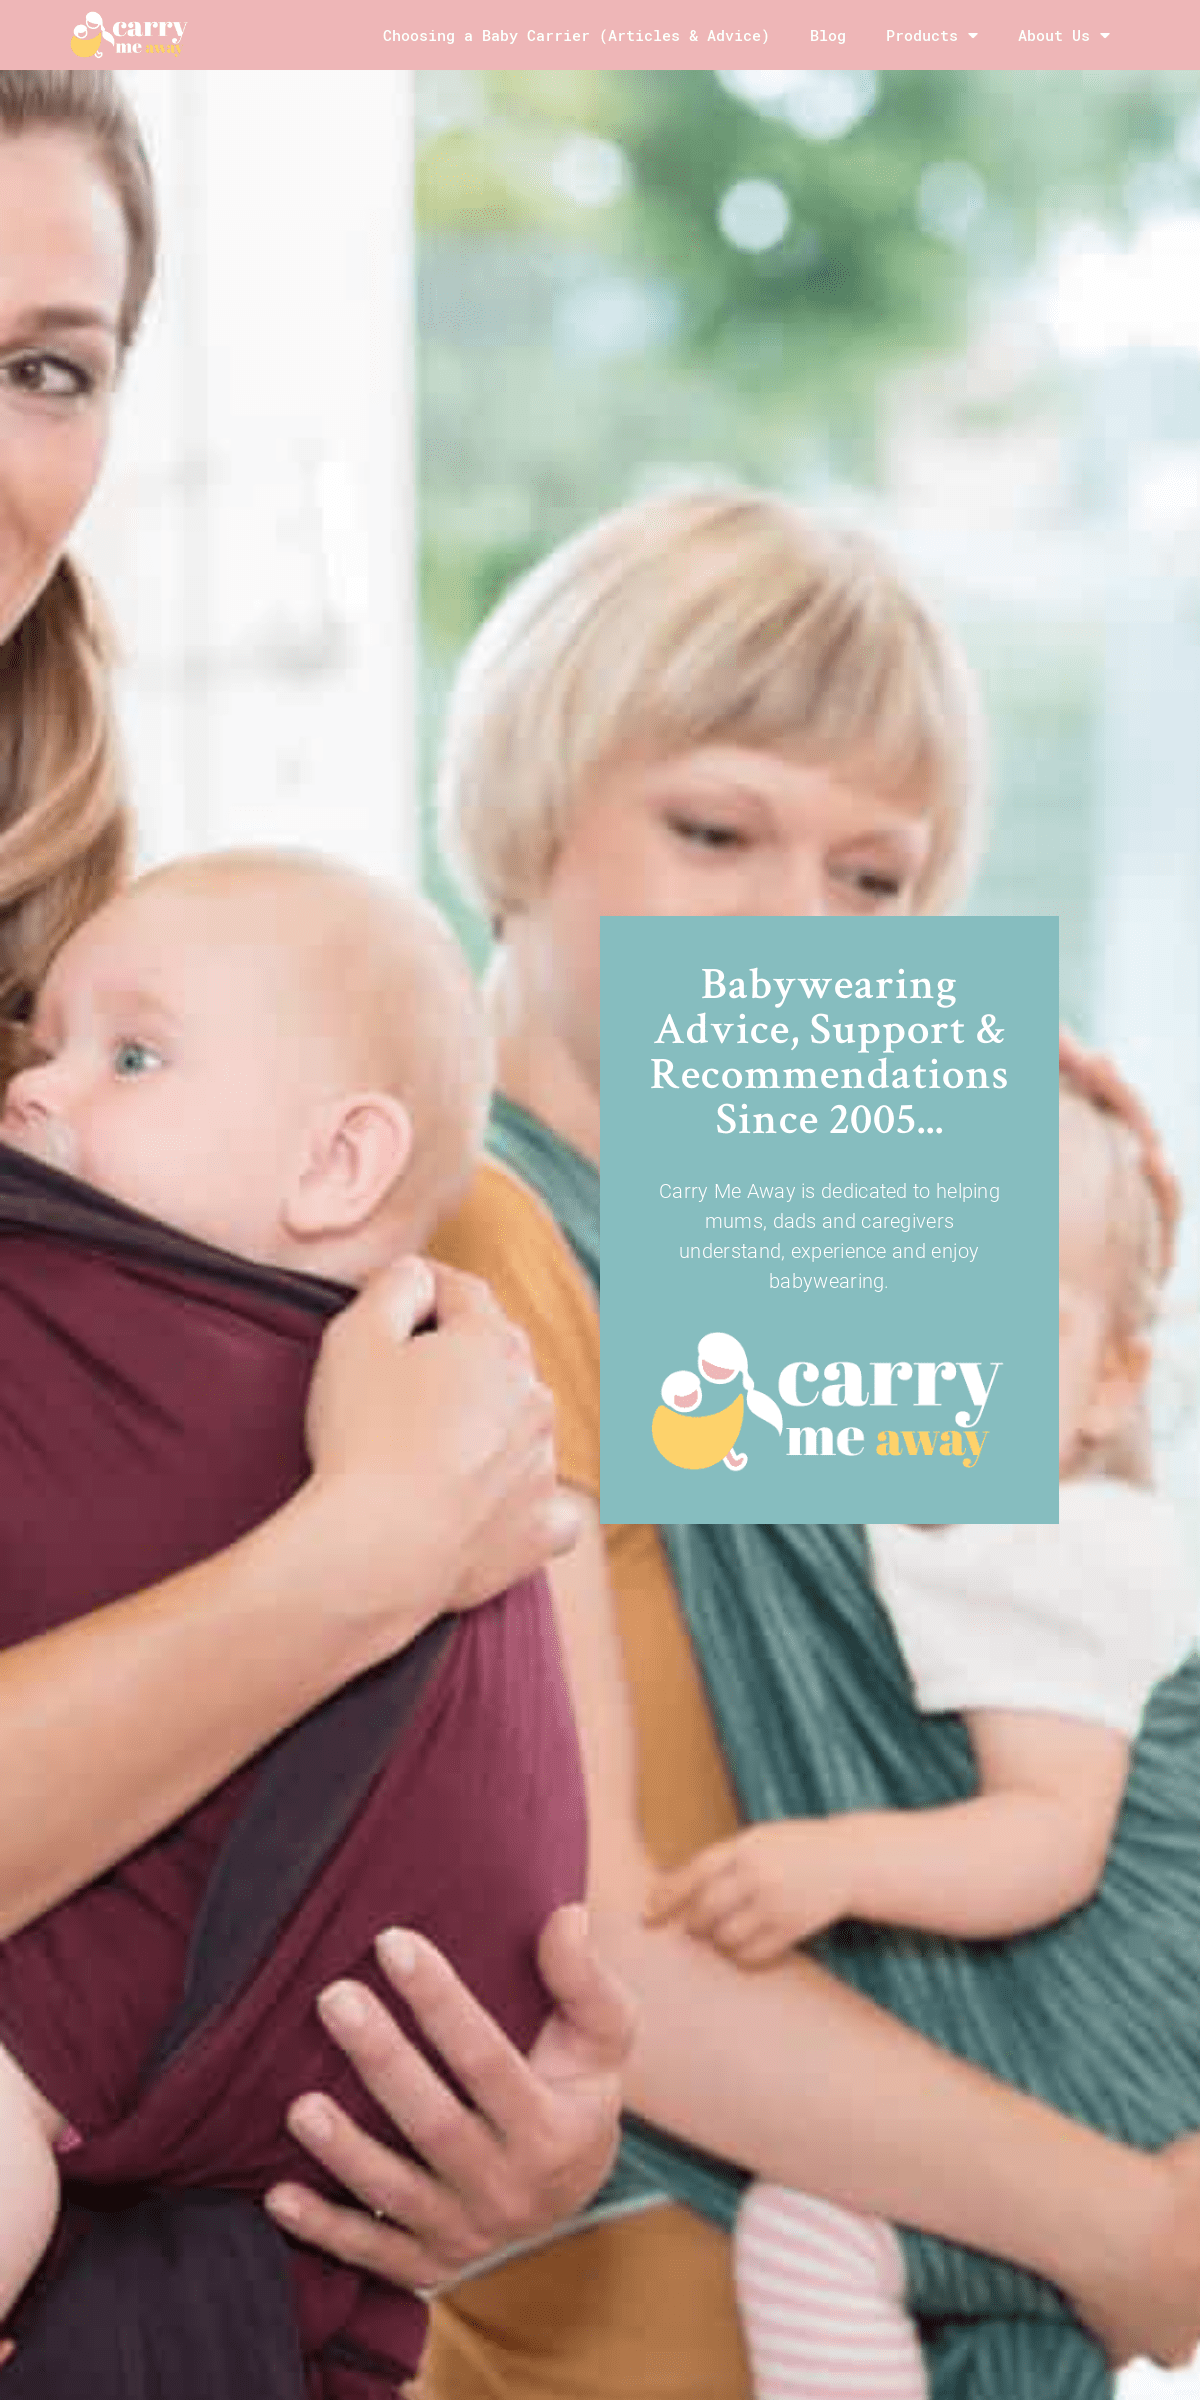 A complete backup of carrymeaway.com